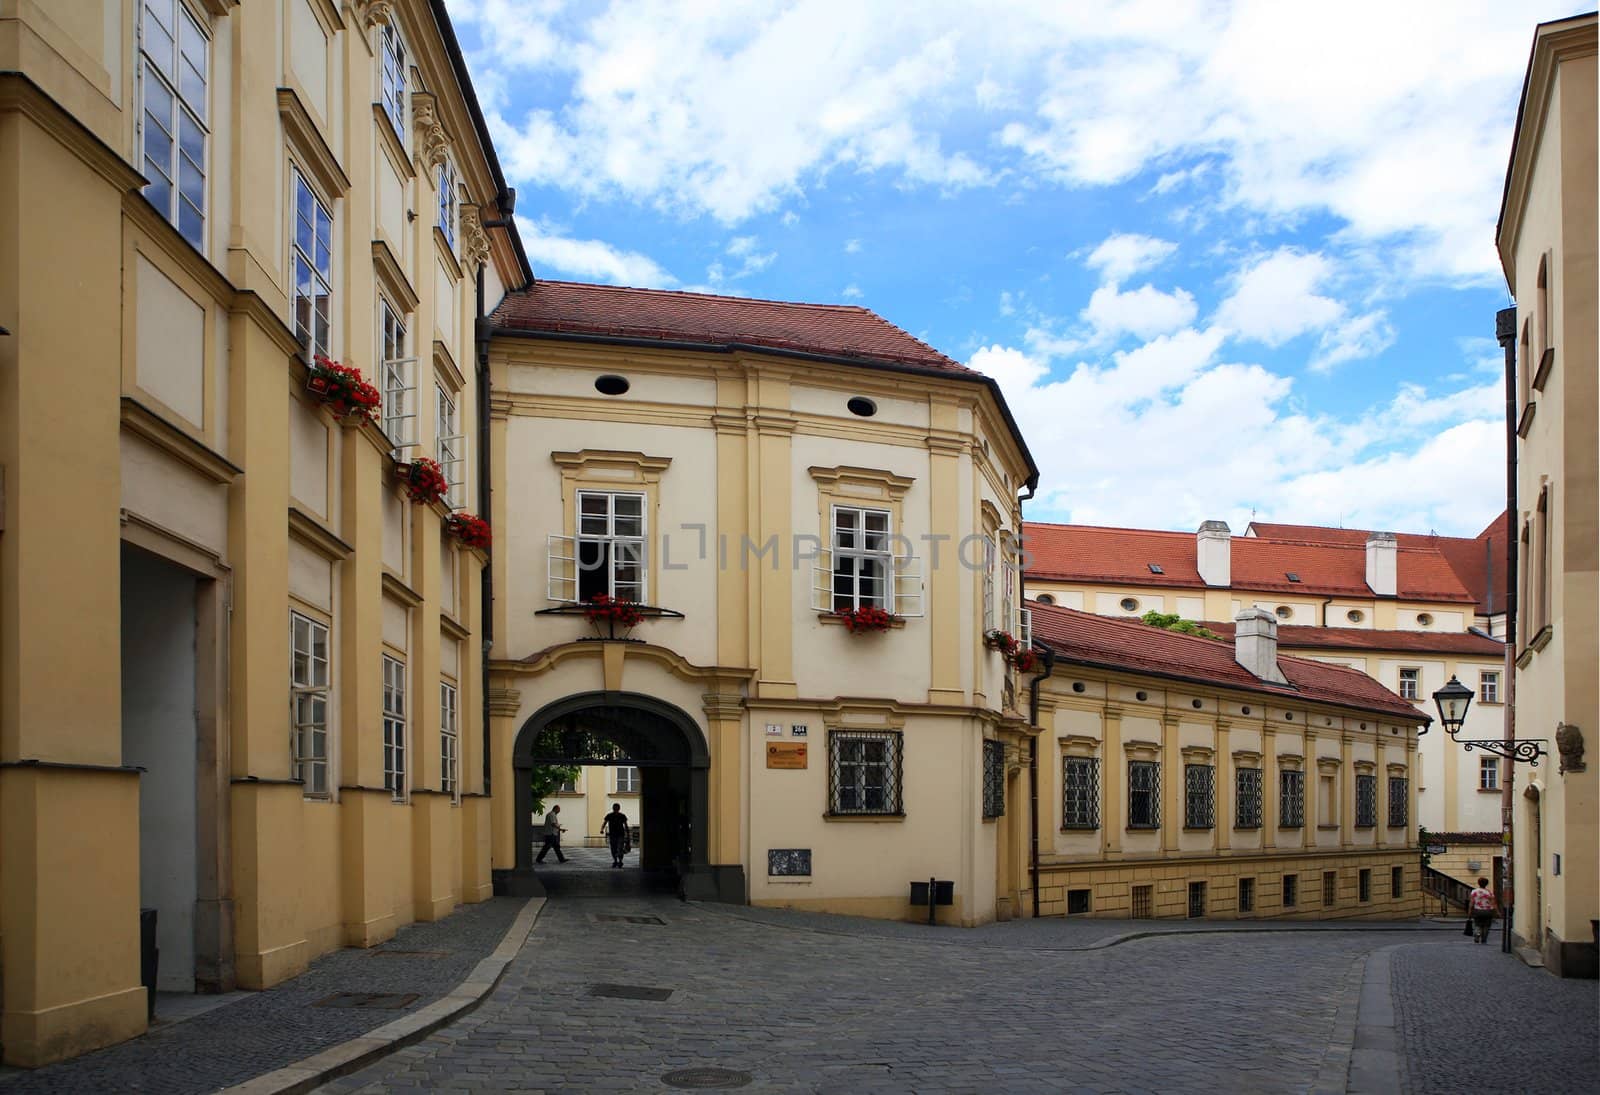 Guildhall in the center of Brno, Czech  republic